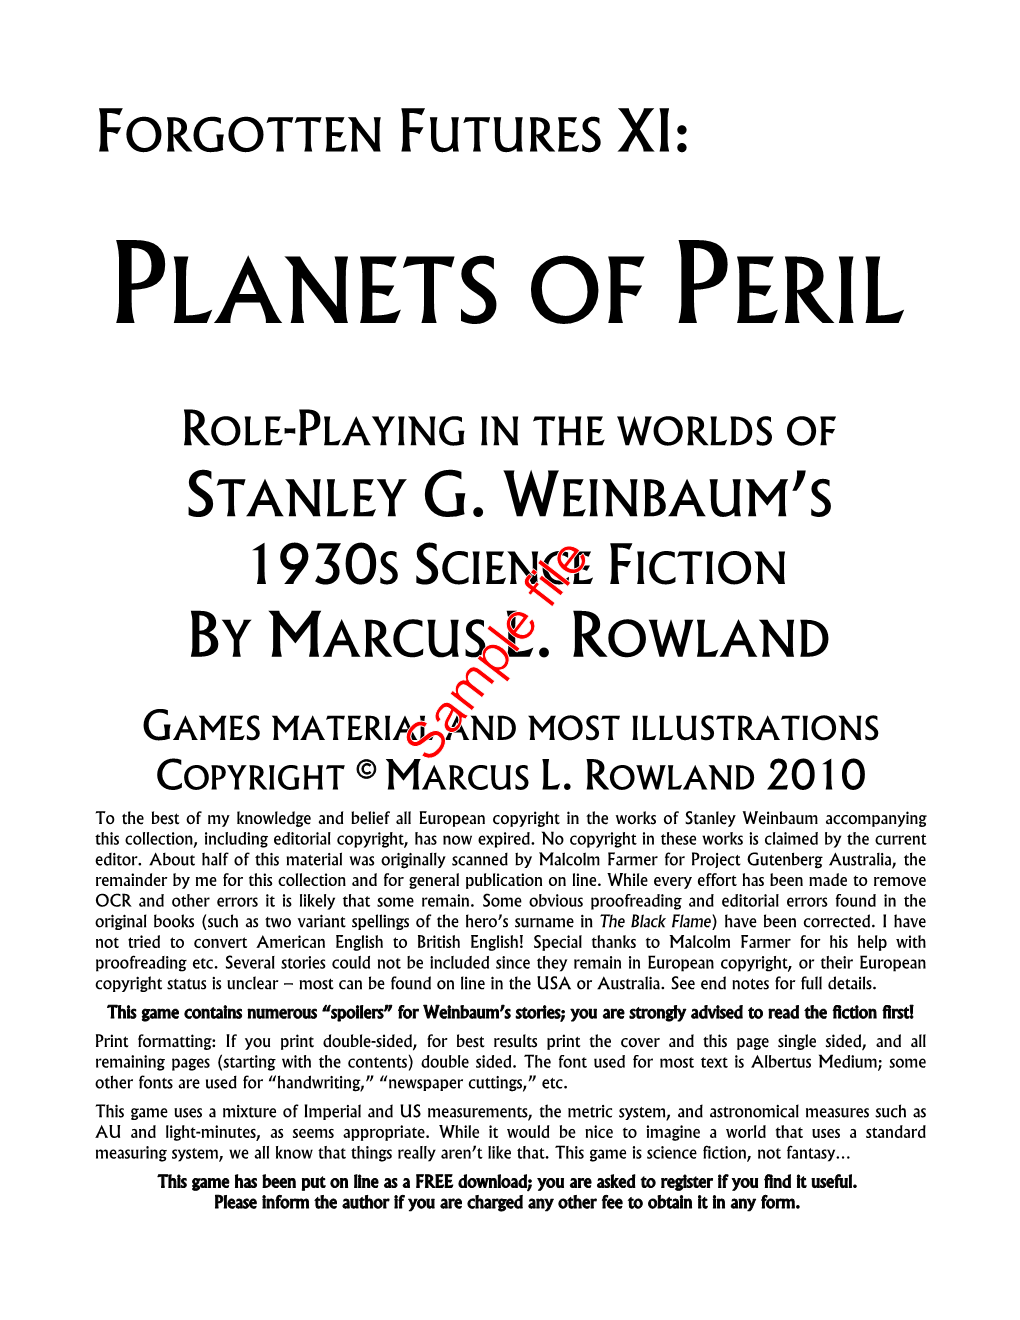 Planets of Peril